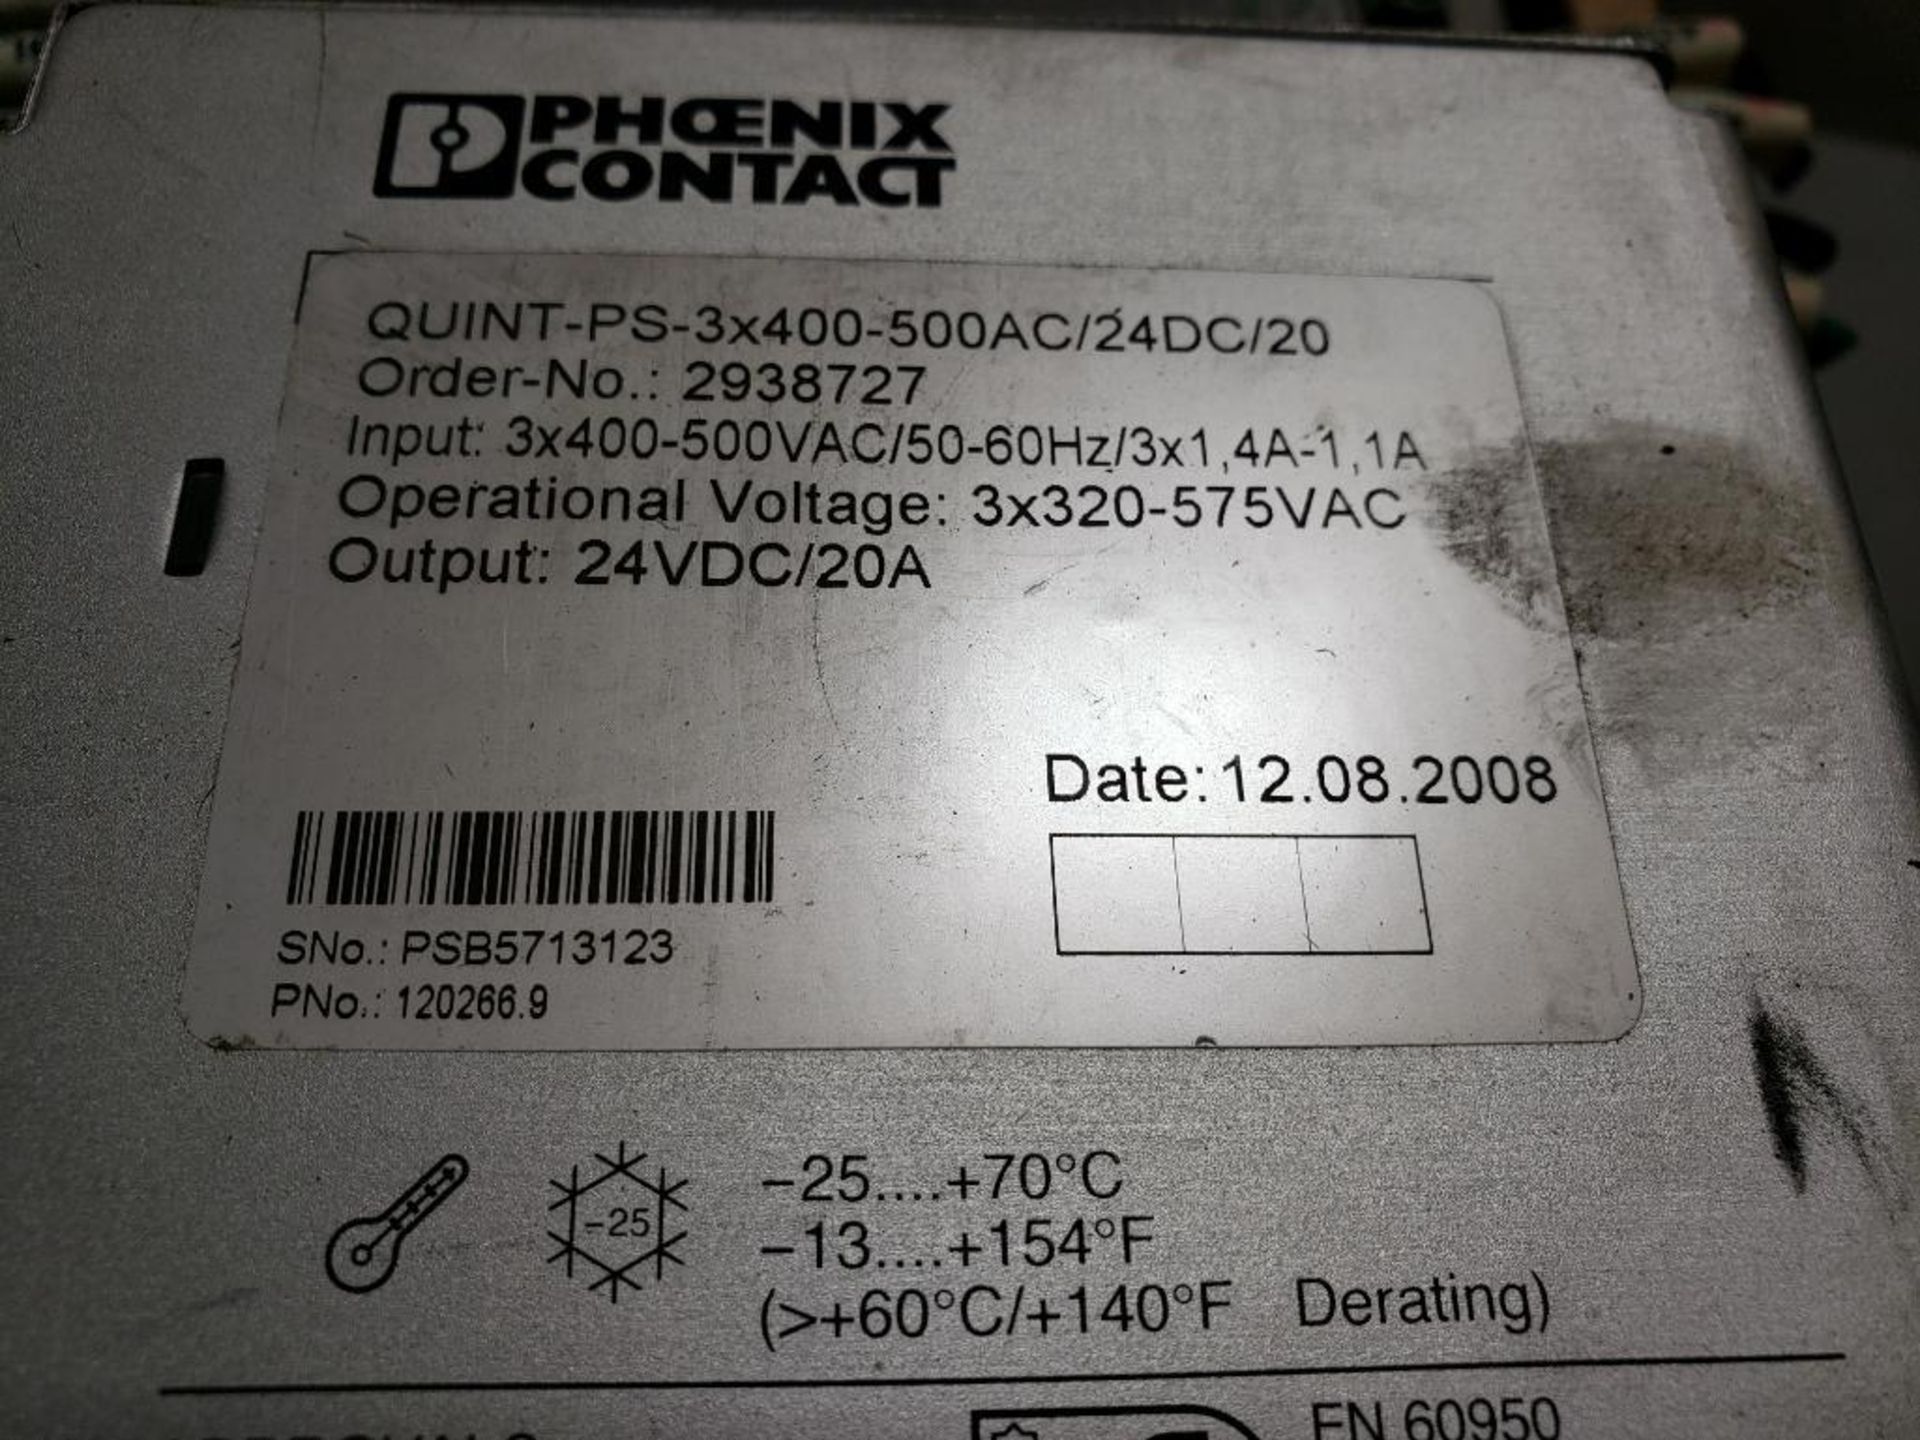 Qty 4 - Phoenix Contact power supplies. Part number QUINT-PS-3X400-500AC/24DC/20. - Image 4 of 6